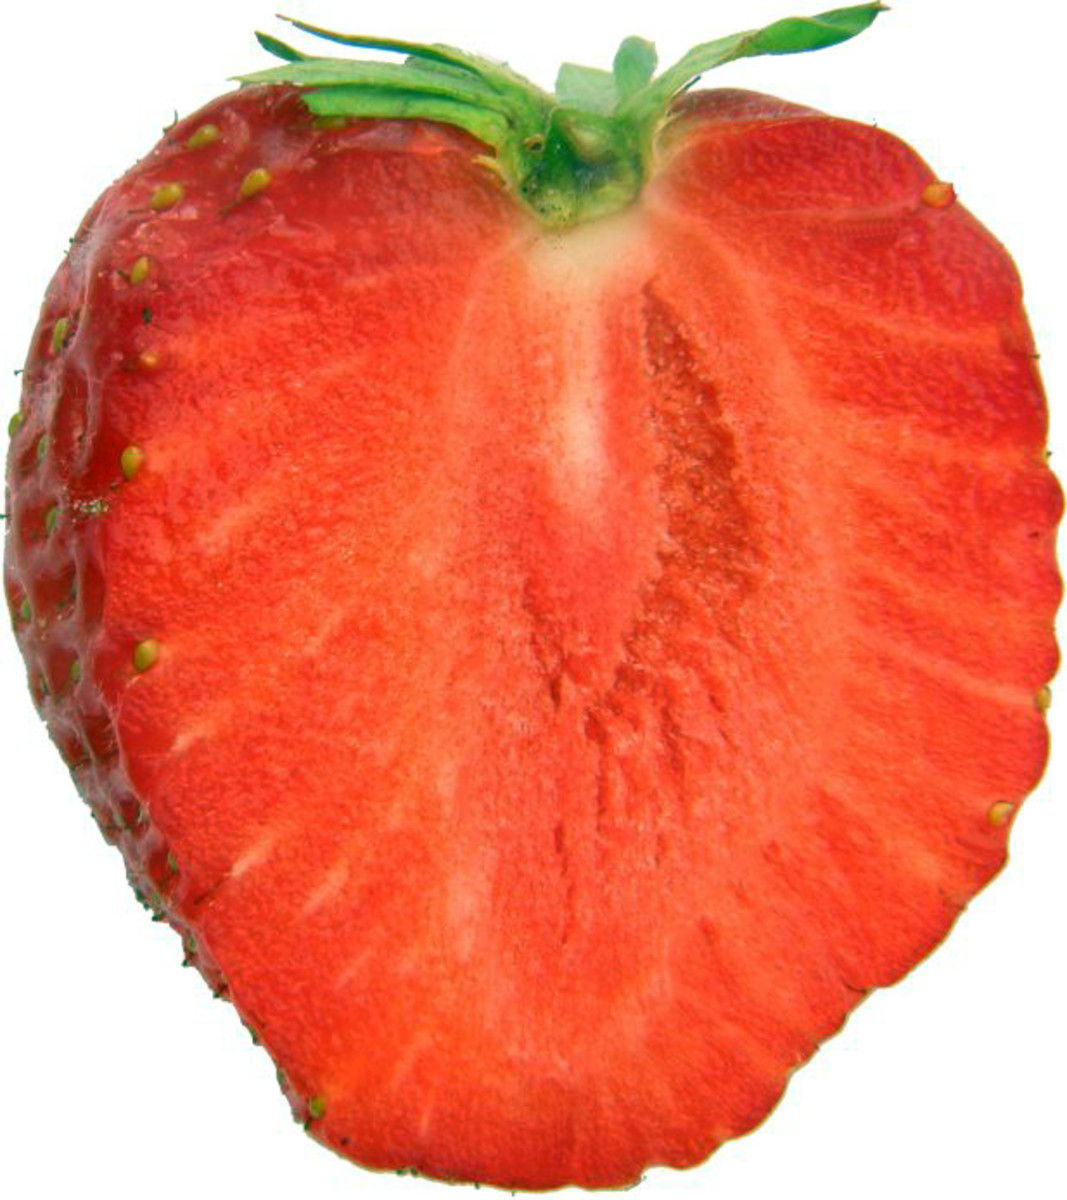  strawberries are an aphrodisiac and commonly associated with love and Saint Valentne's Day.